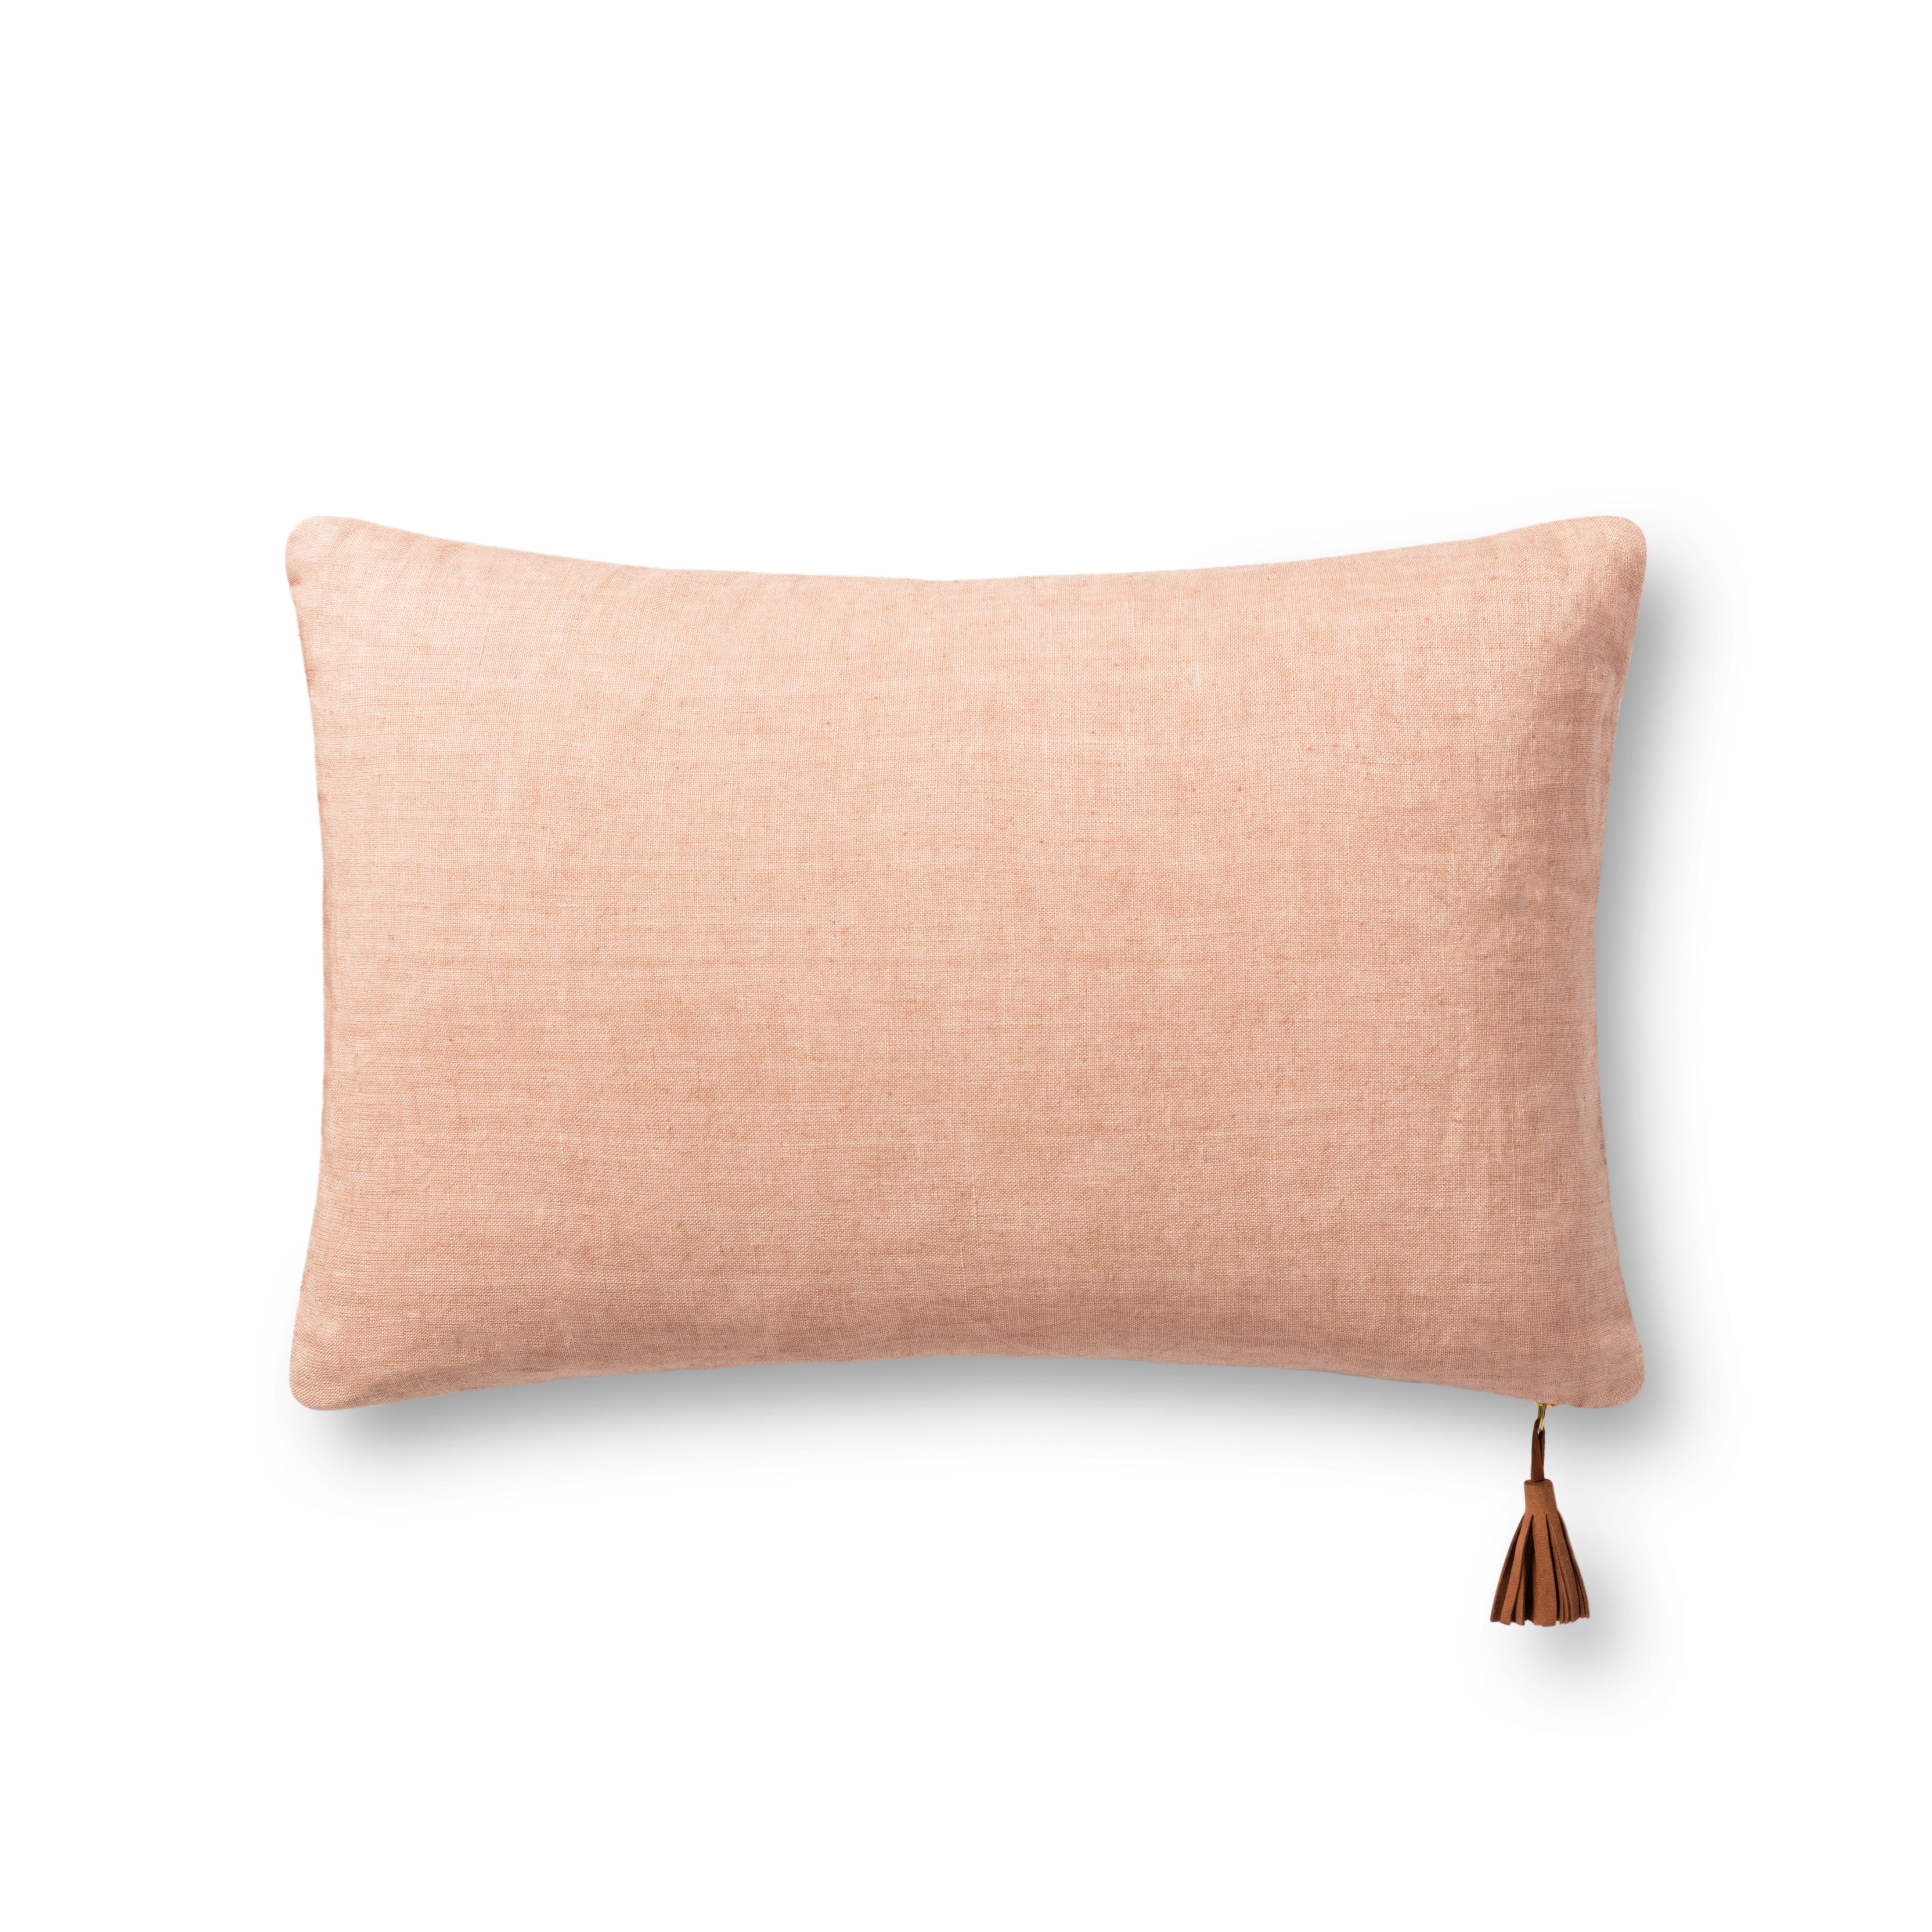 Magnolia Home by Joanna Gaines x Loloi Pillows P1153 Sage / Sand 13" x 21" Cover Only - Image 1